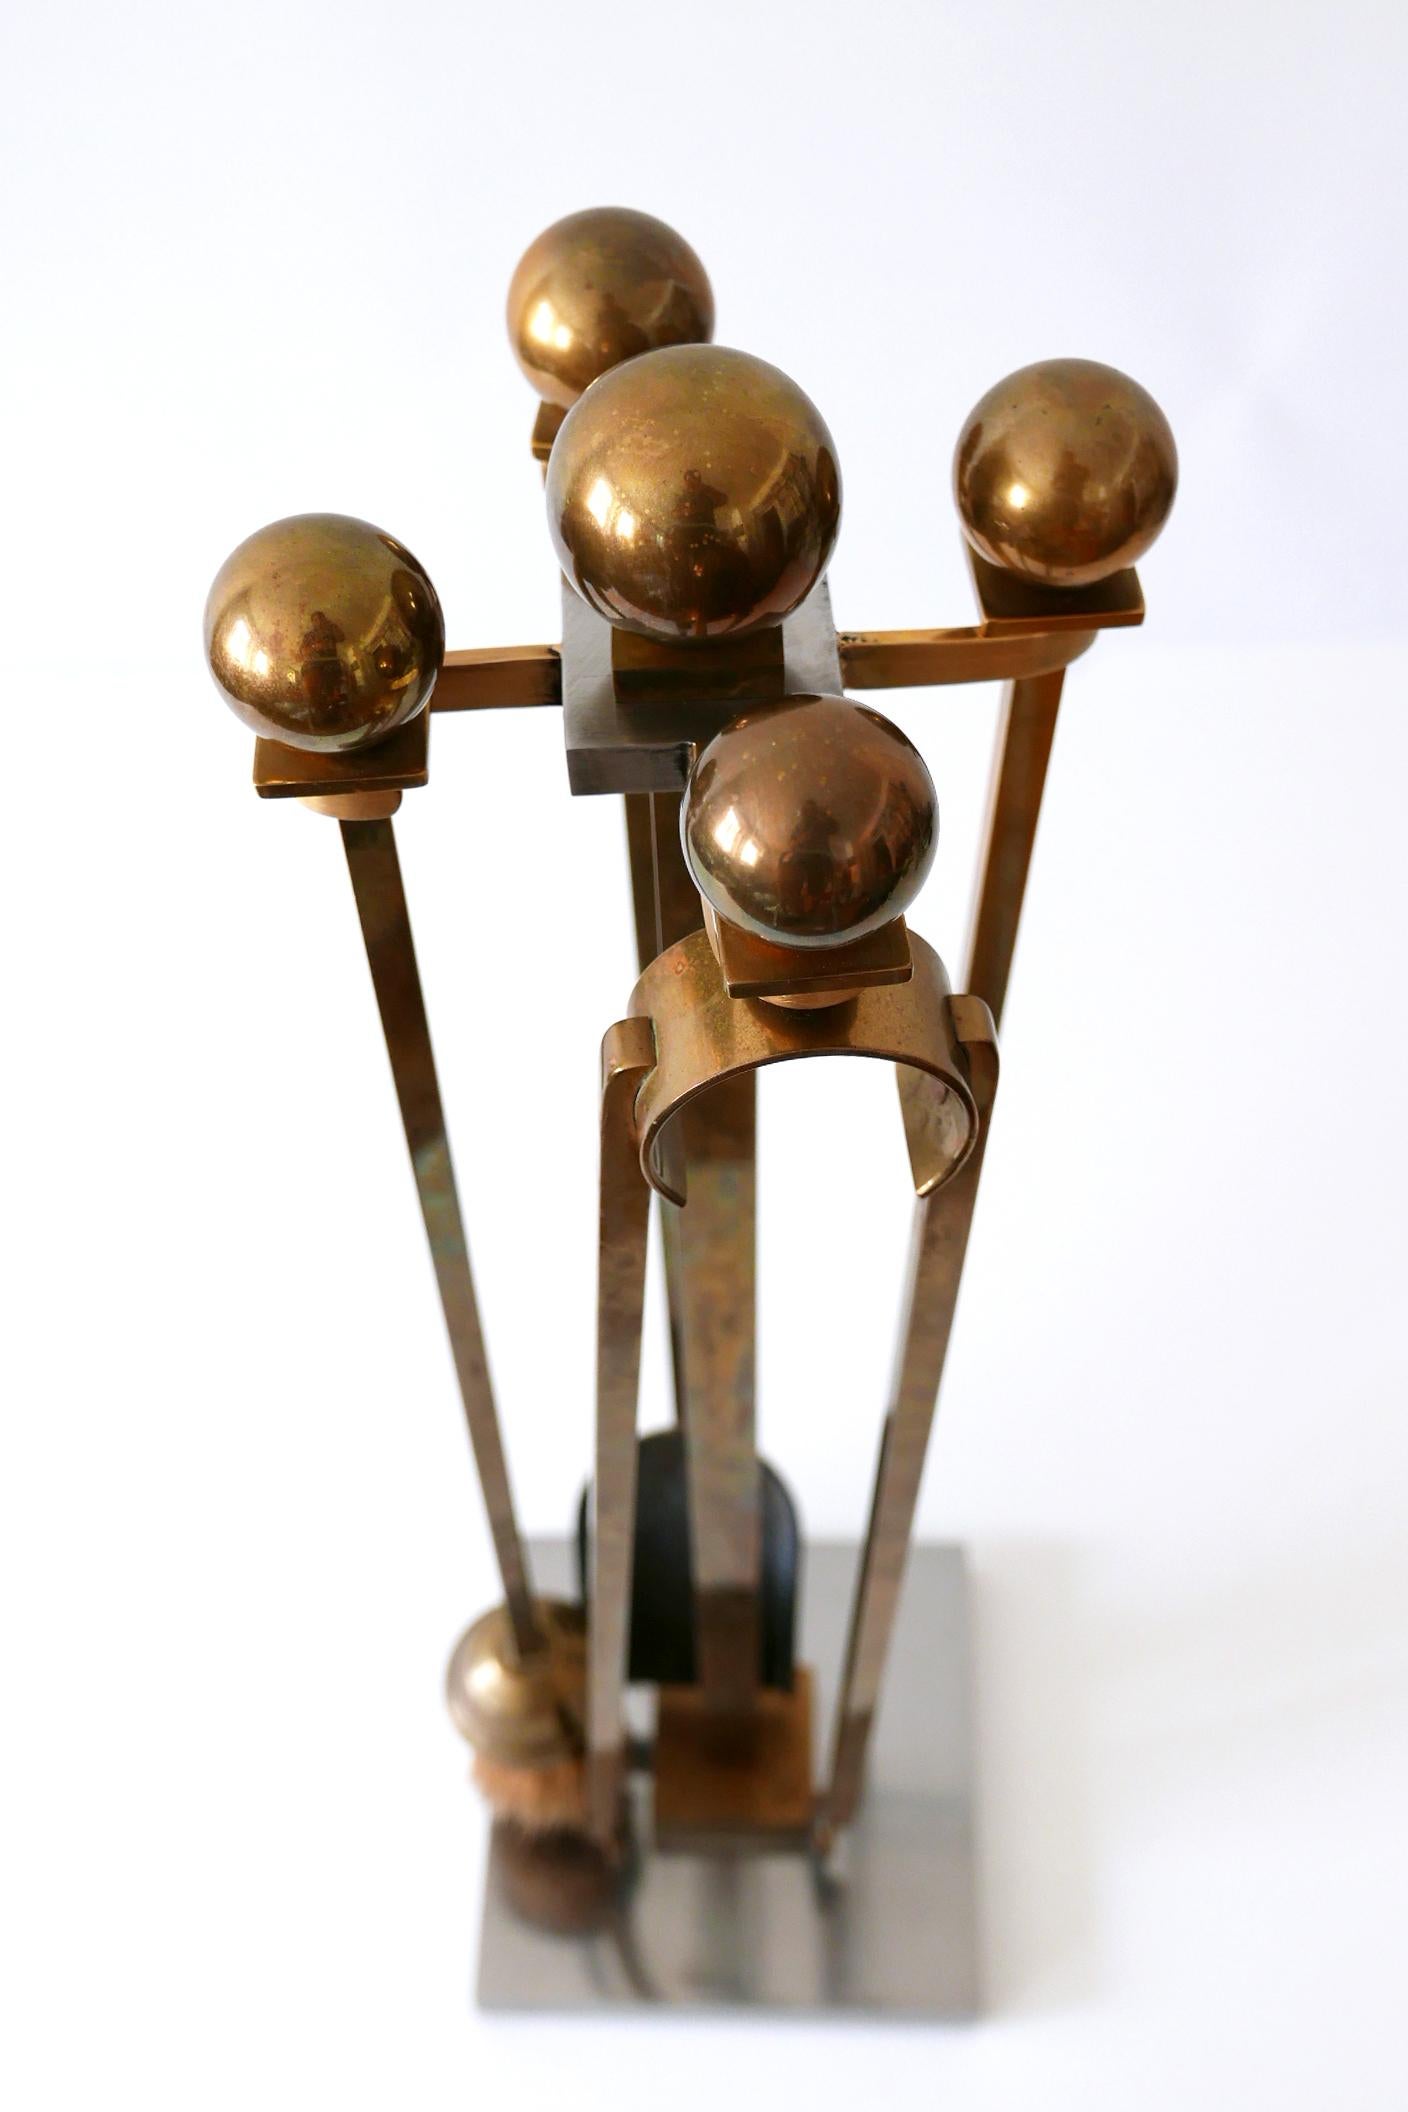 Exceptional Mid-Century Modern Brass and Steel Fireplace Tools 1970s For Sale 3